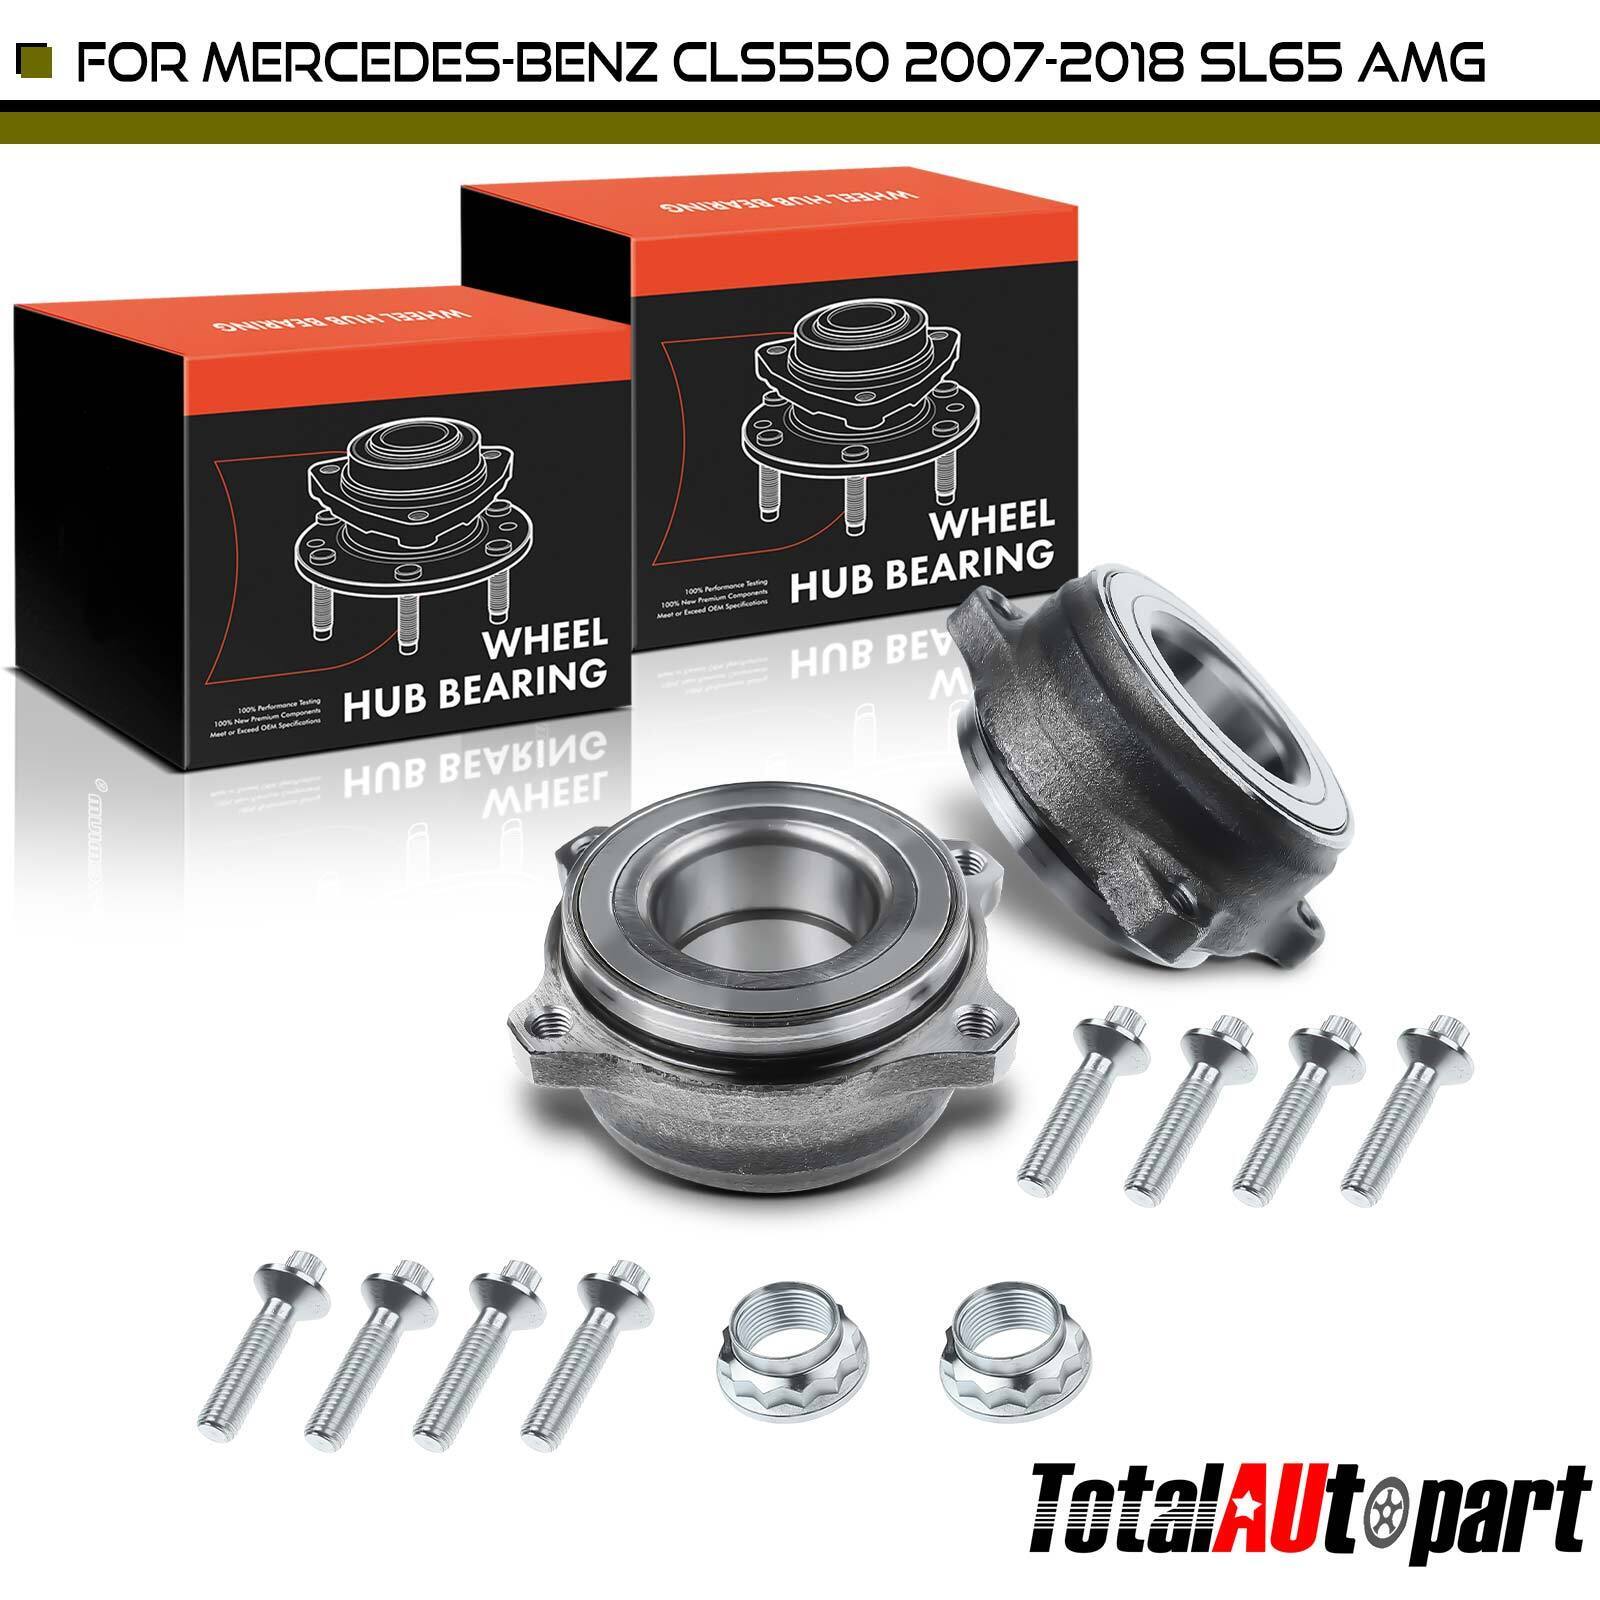 2x Wheel Hub Bearing Assembly for Mercedes-Benz CL550 2007-2014 CL600 E250 F & R